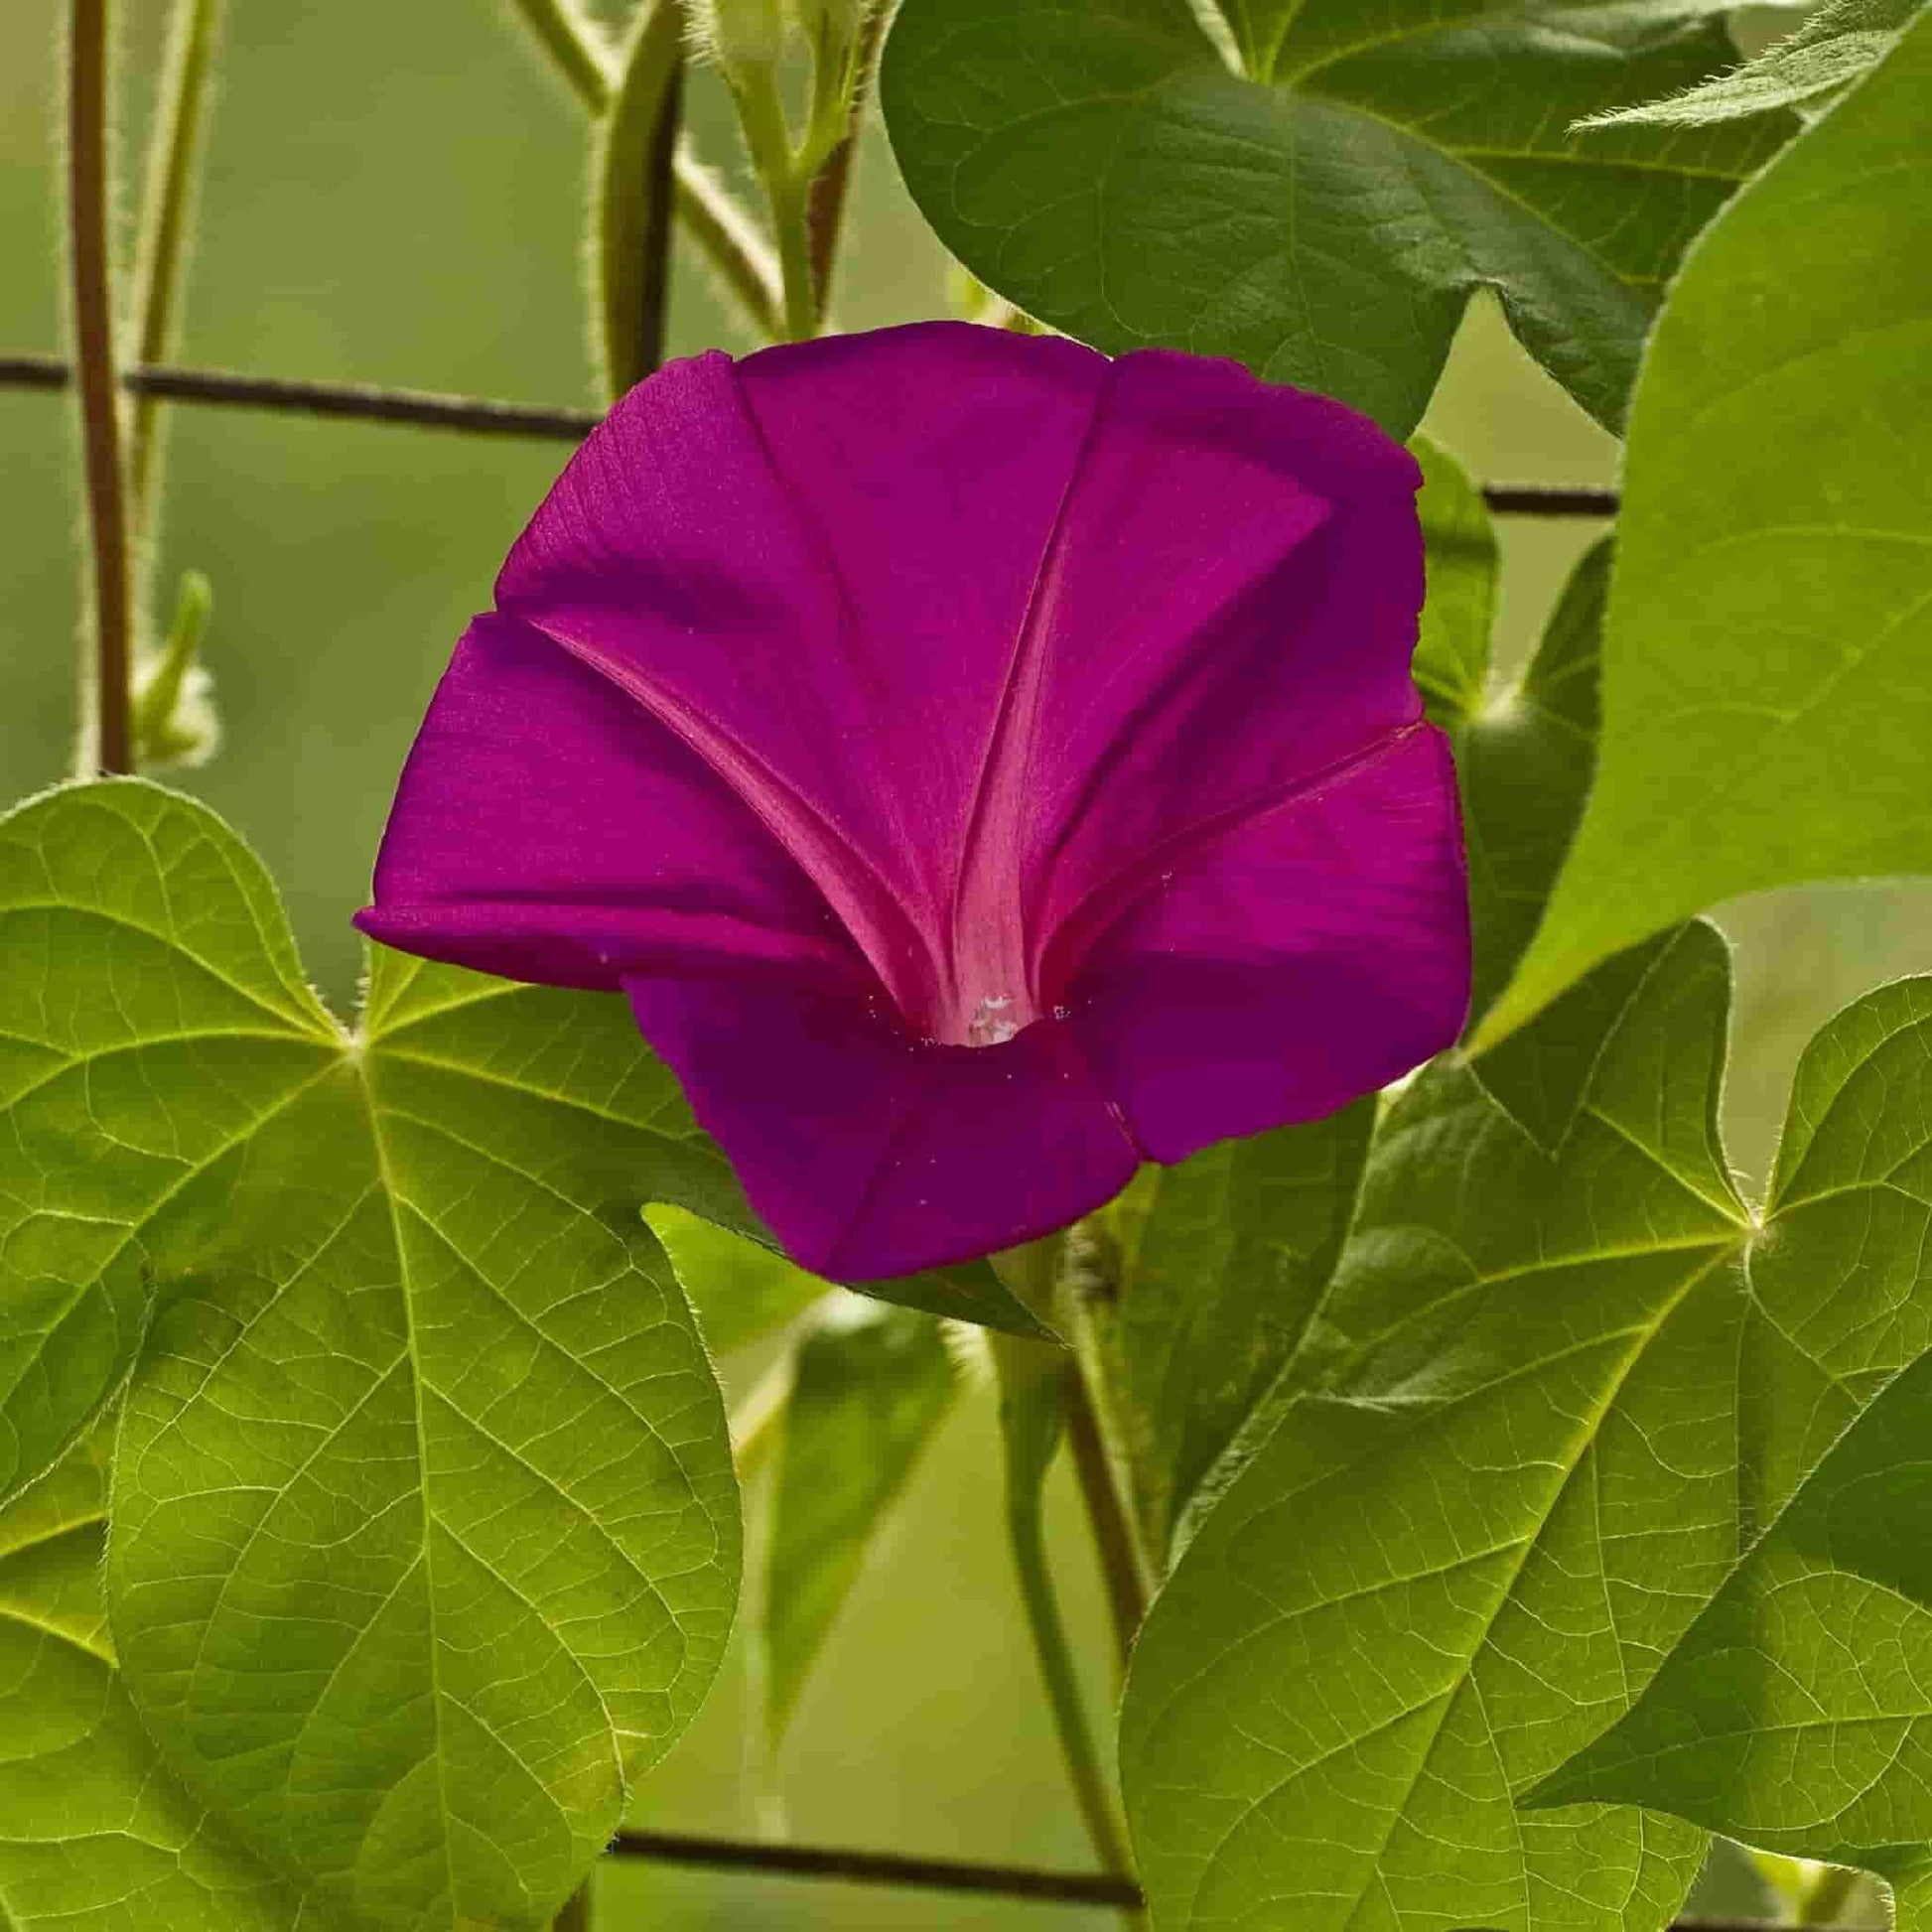 Scarlet O'Hara Morning Glory flower blooming magnificently against its beautiful, green vining foliage.